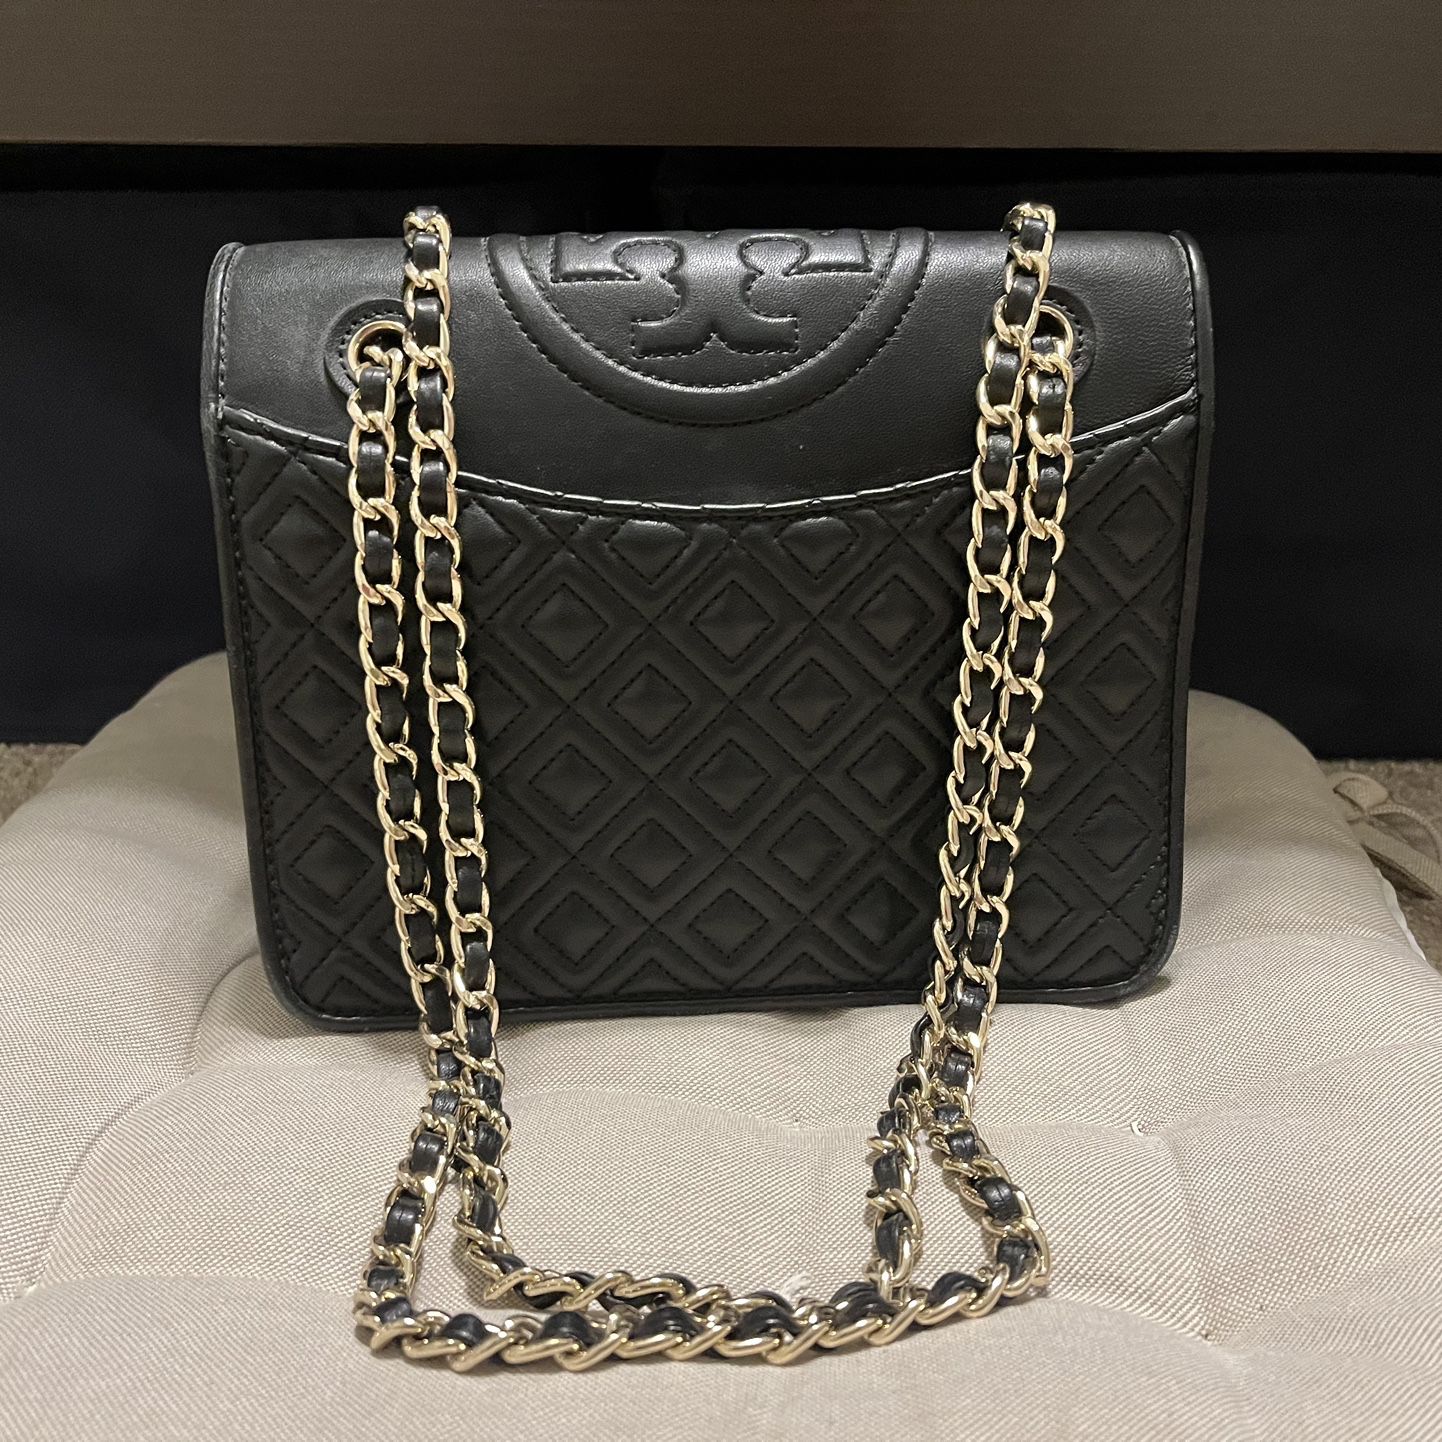 Tory Burch Fleming Tote ( Norwood Green ) for Sale in Placentia, CA -  OfferUp